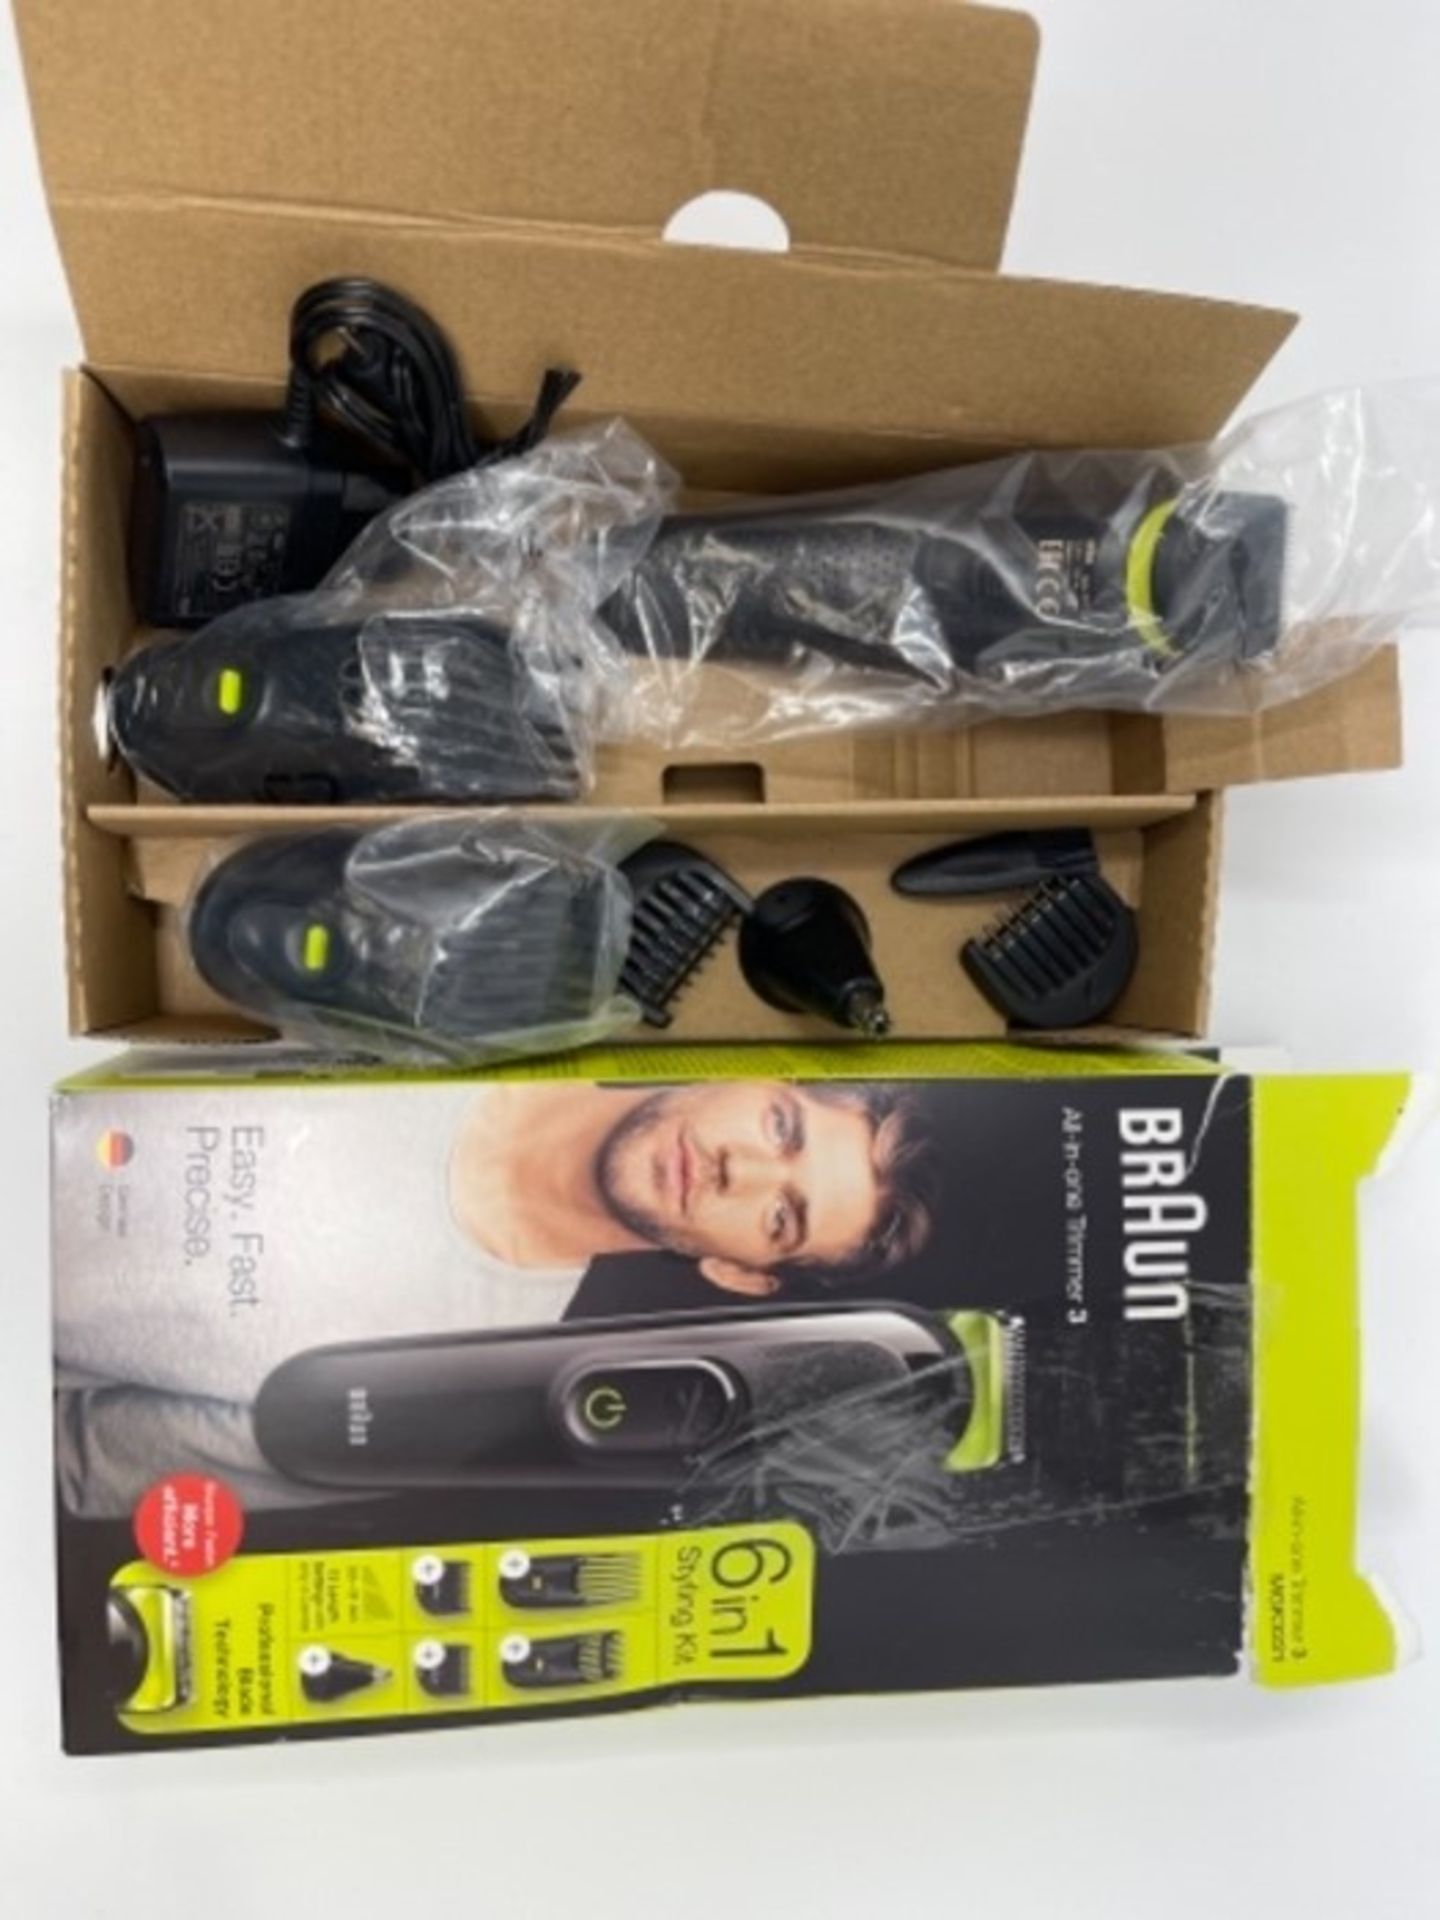 Braun 6-in-1 All-in-one Trimmer 3 MGK3221, Beard - Image 2 of 2